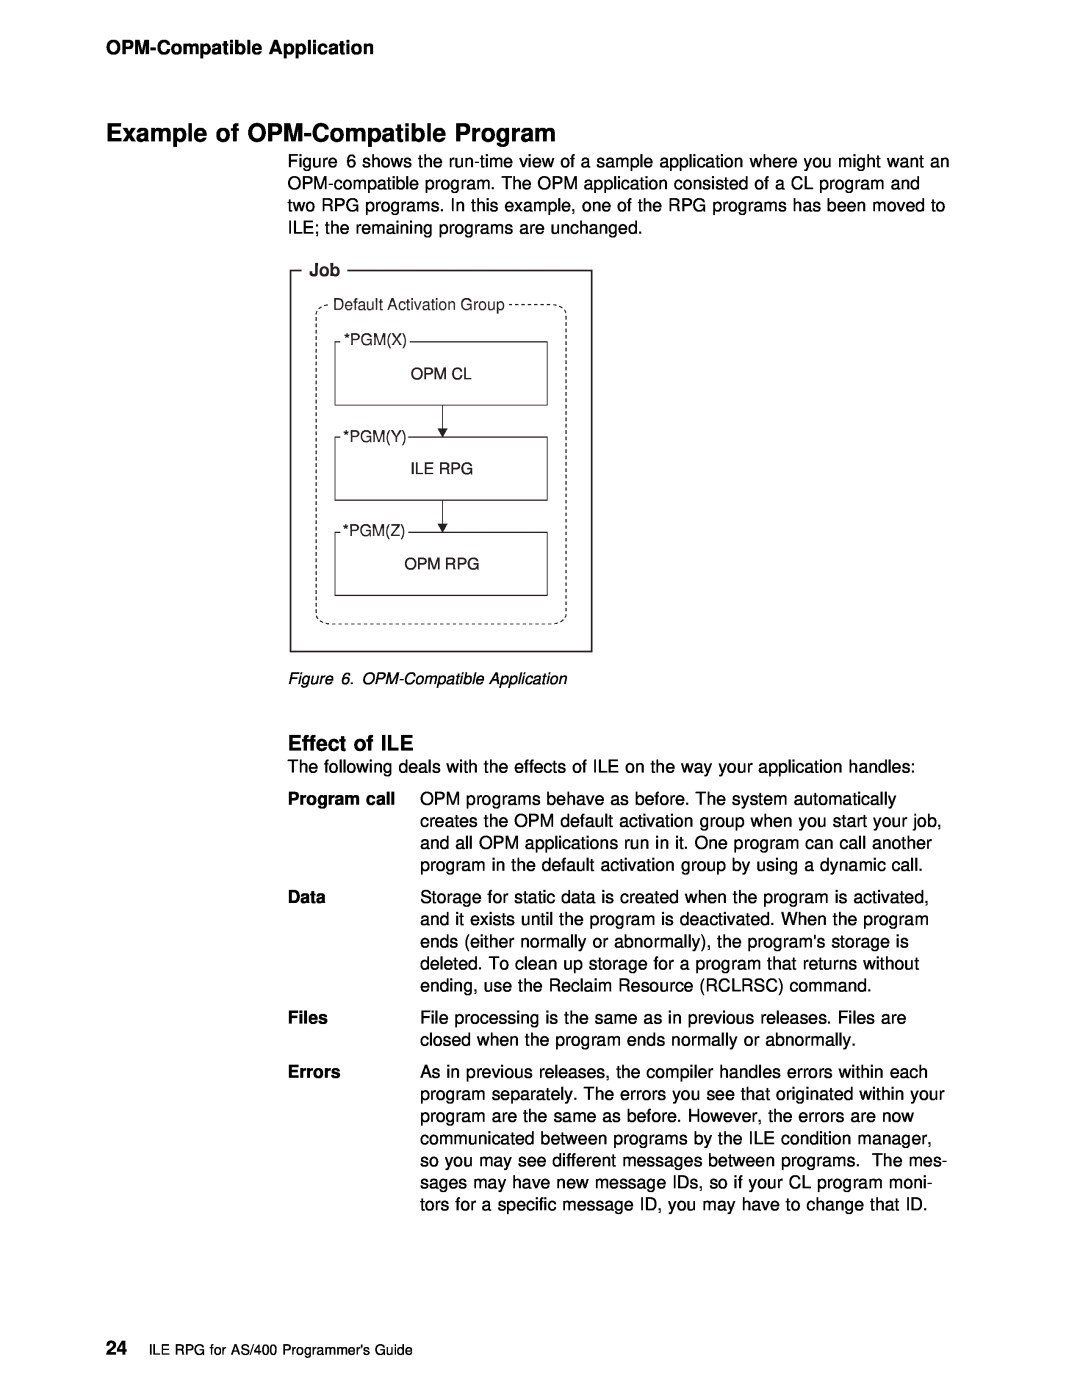 IBM AS/400 manual Example of OPM-Compatible Program, Effect of ILE, OPM-Compatible Application 